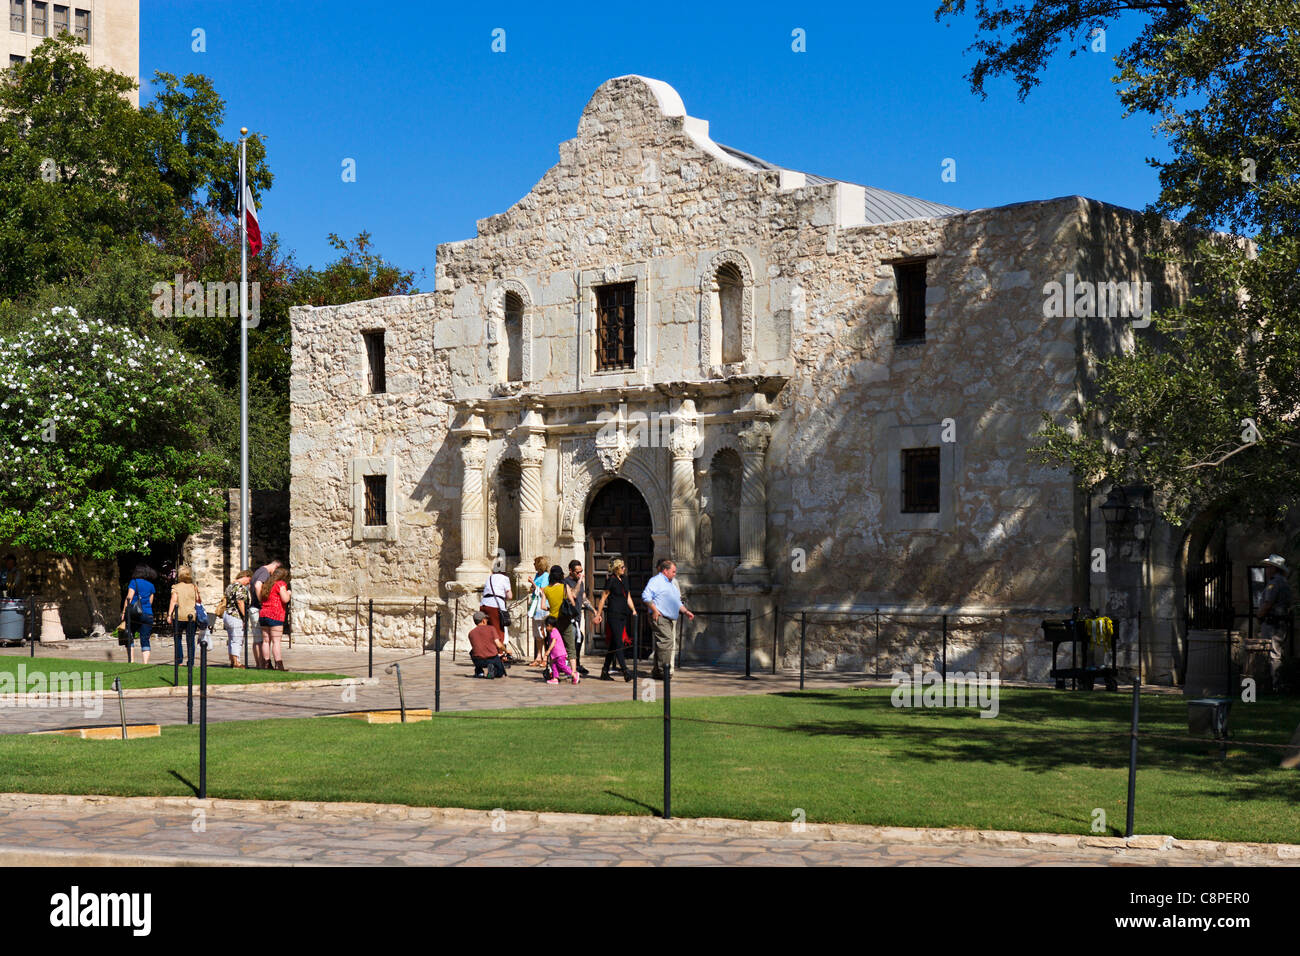 The Alamo. Tourists in front of  The Alamo Mission, site of the famous battle, San Antonio, Texas, USA Stock Photo